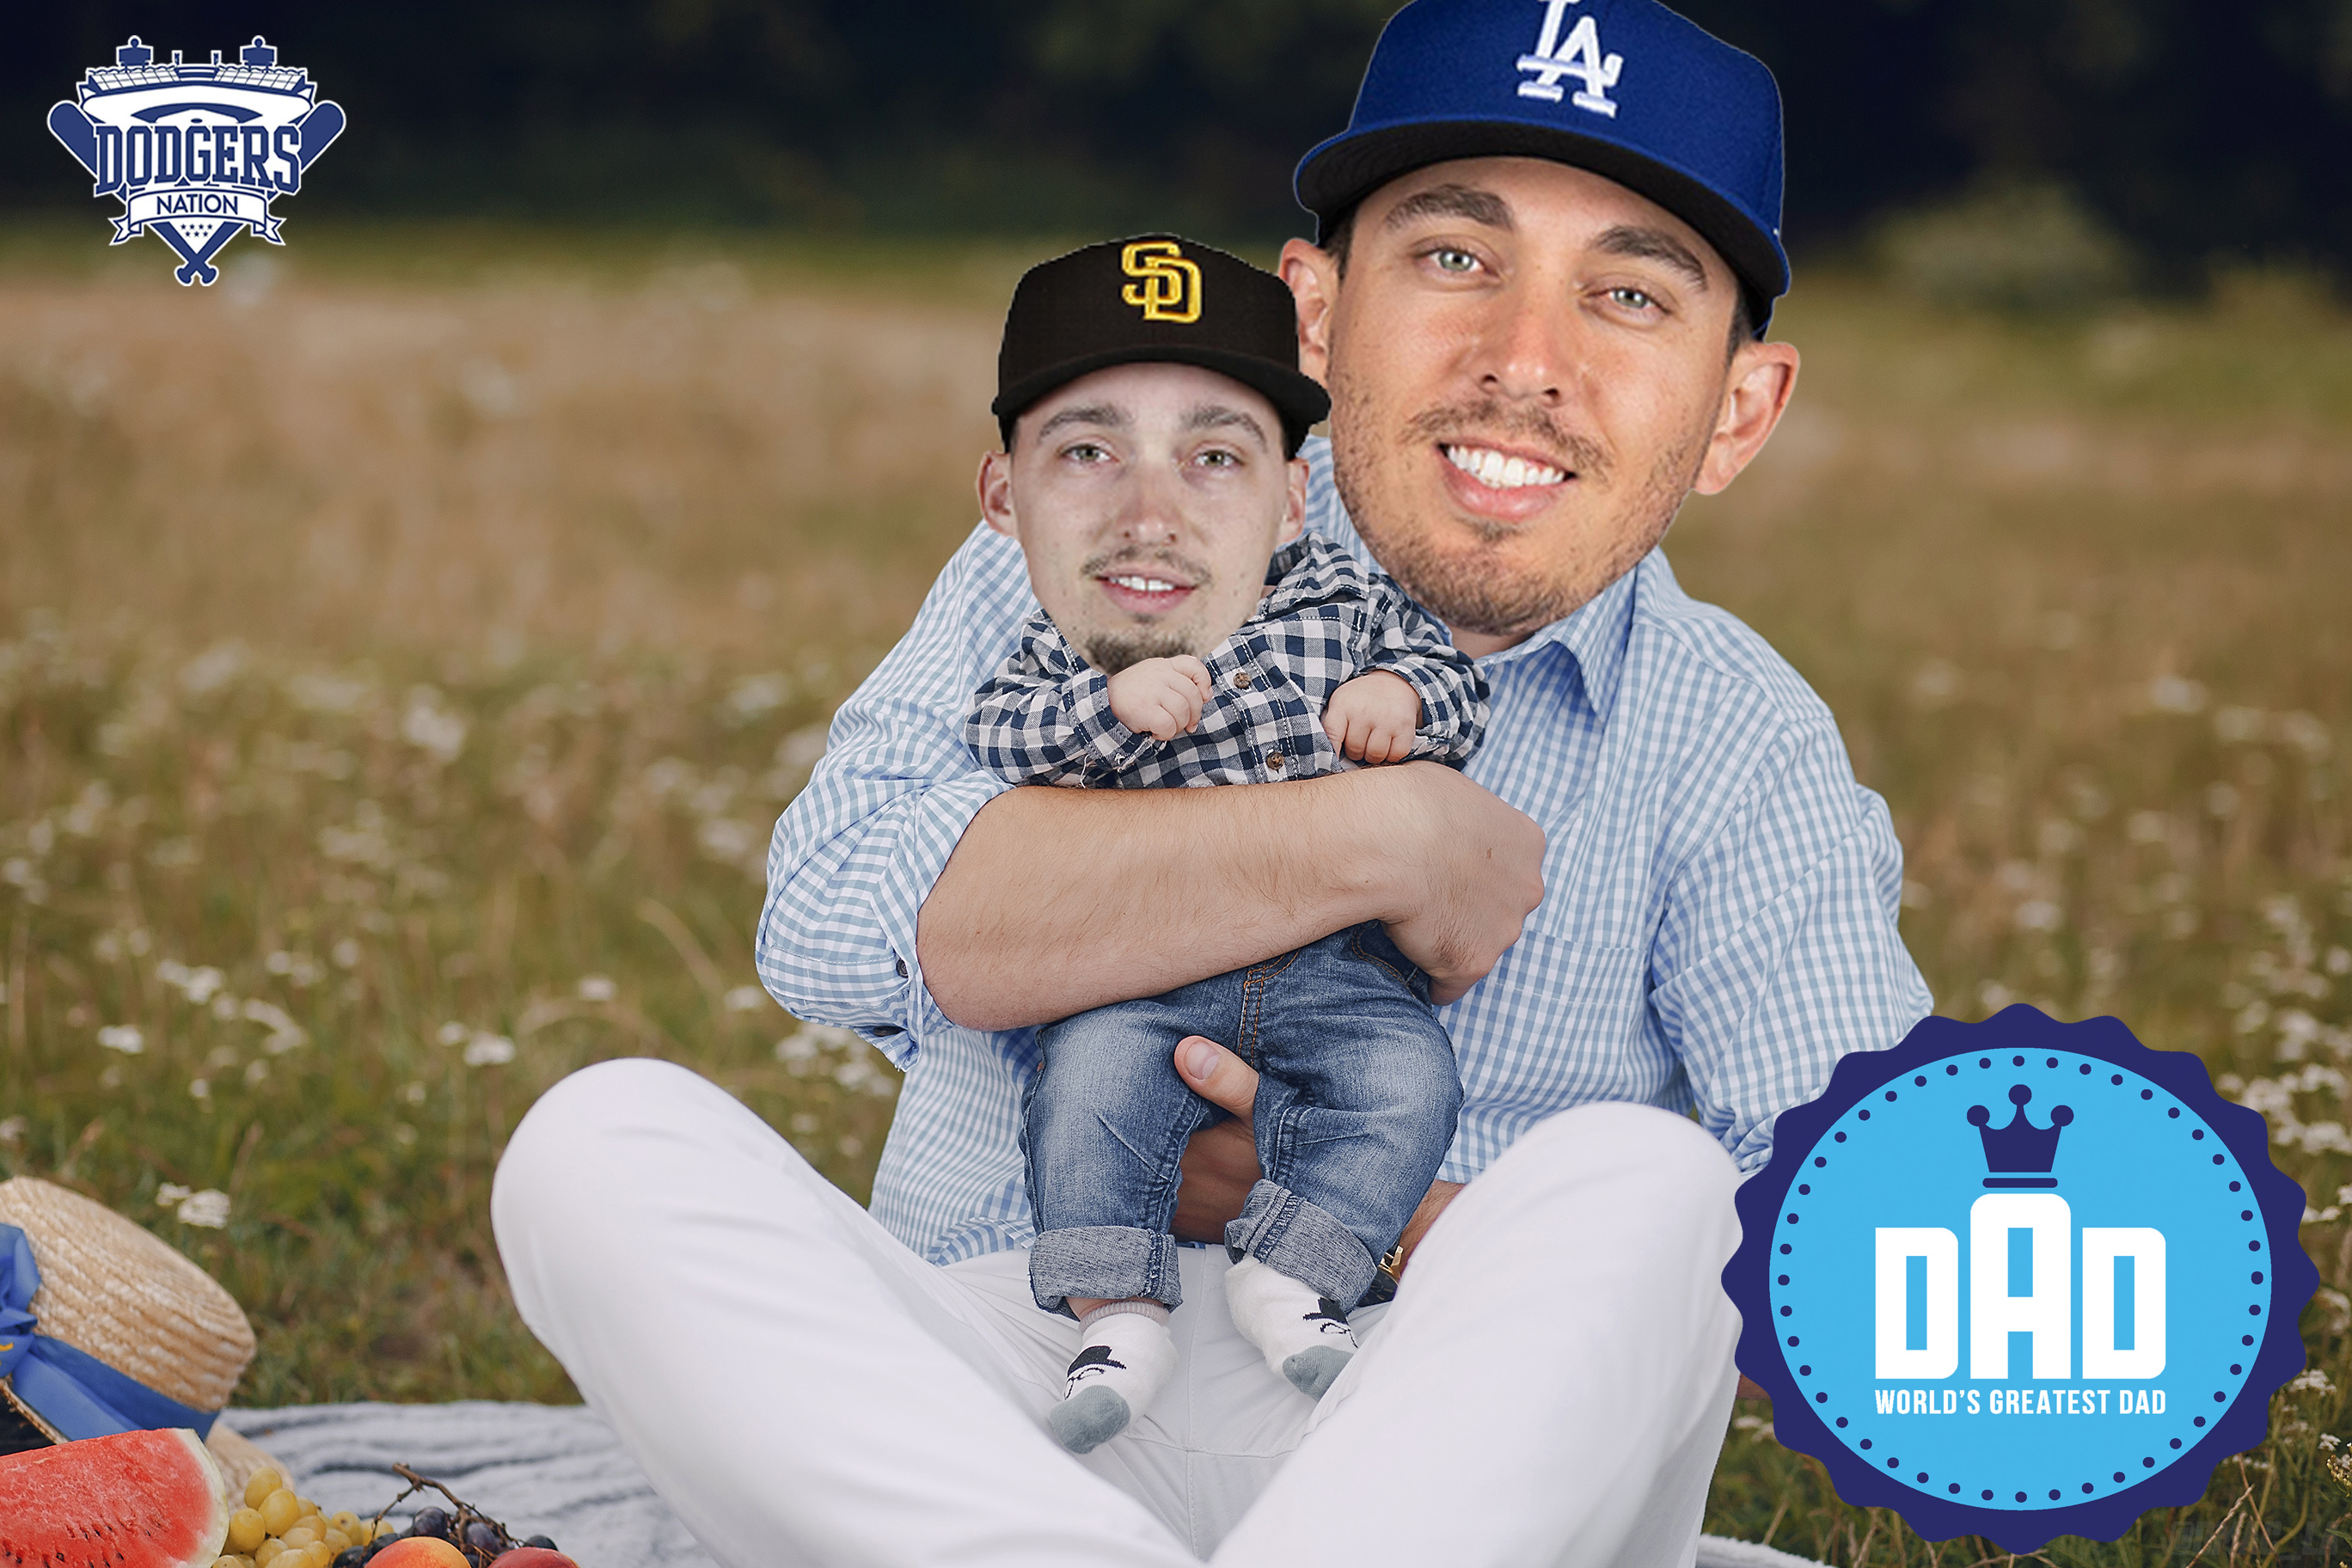 blake snell dad